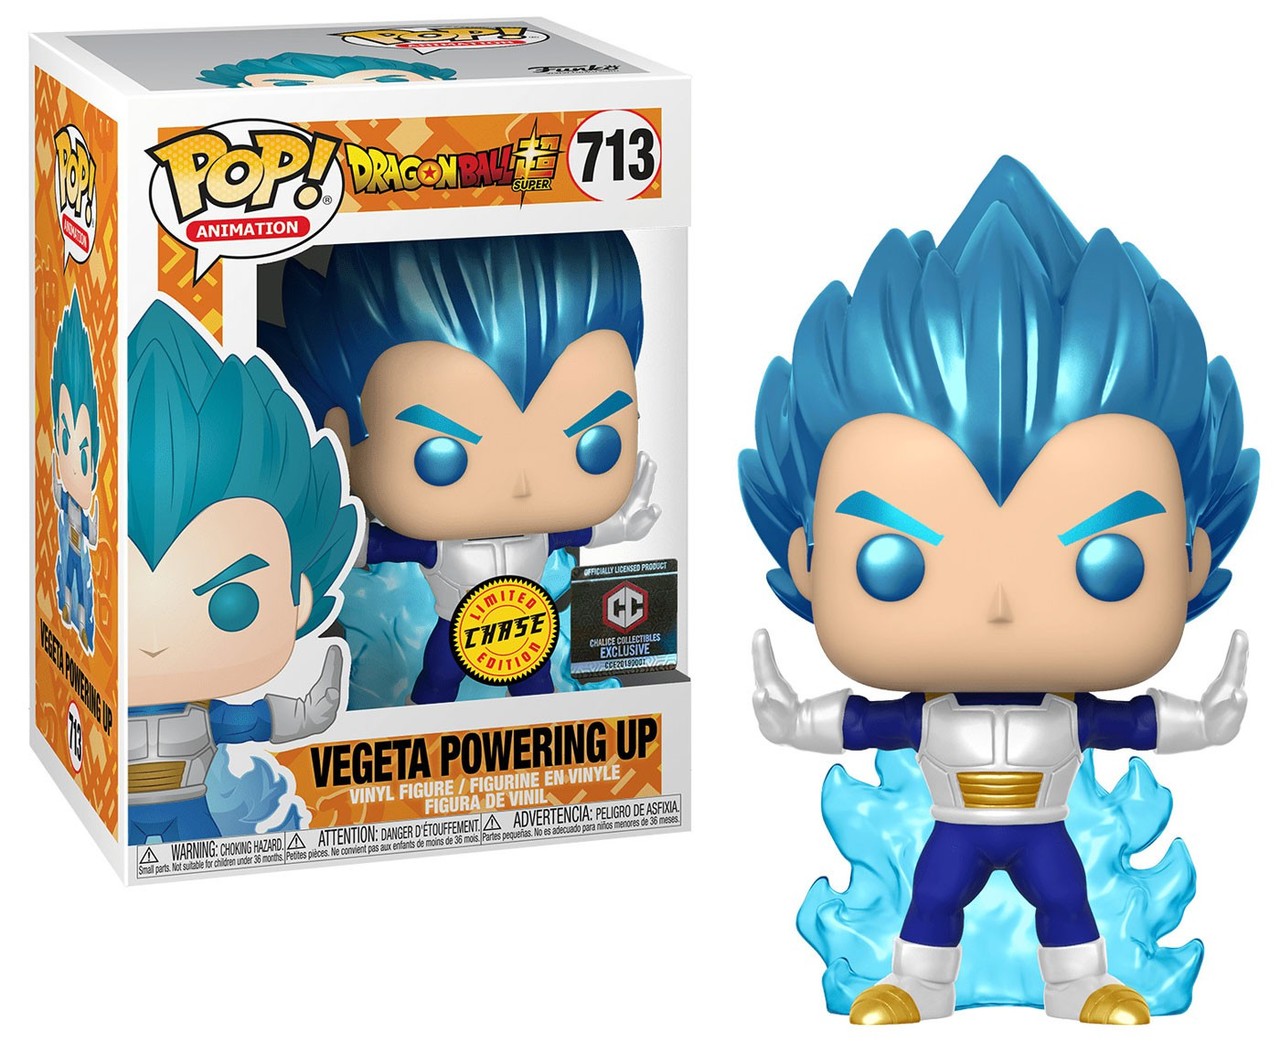 Funko Pop Dragon Ball Z Vegeta Powering Up "Metallic CHASE" Exclusive with SPECIAL EDITION sticker